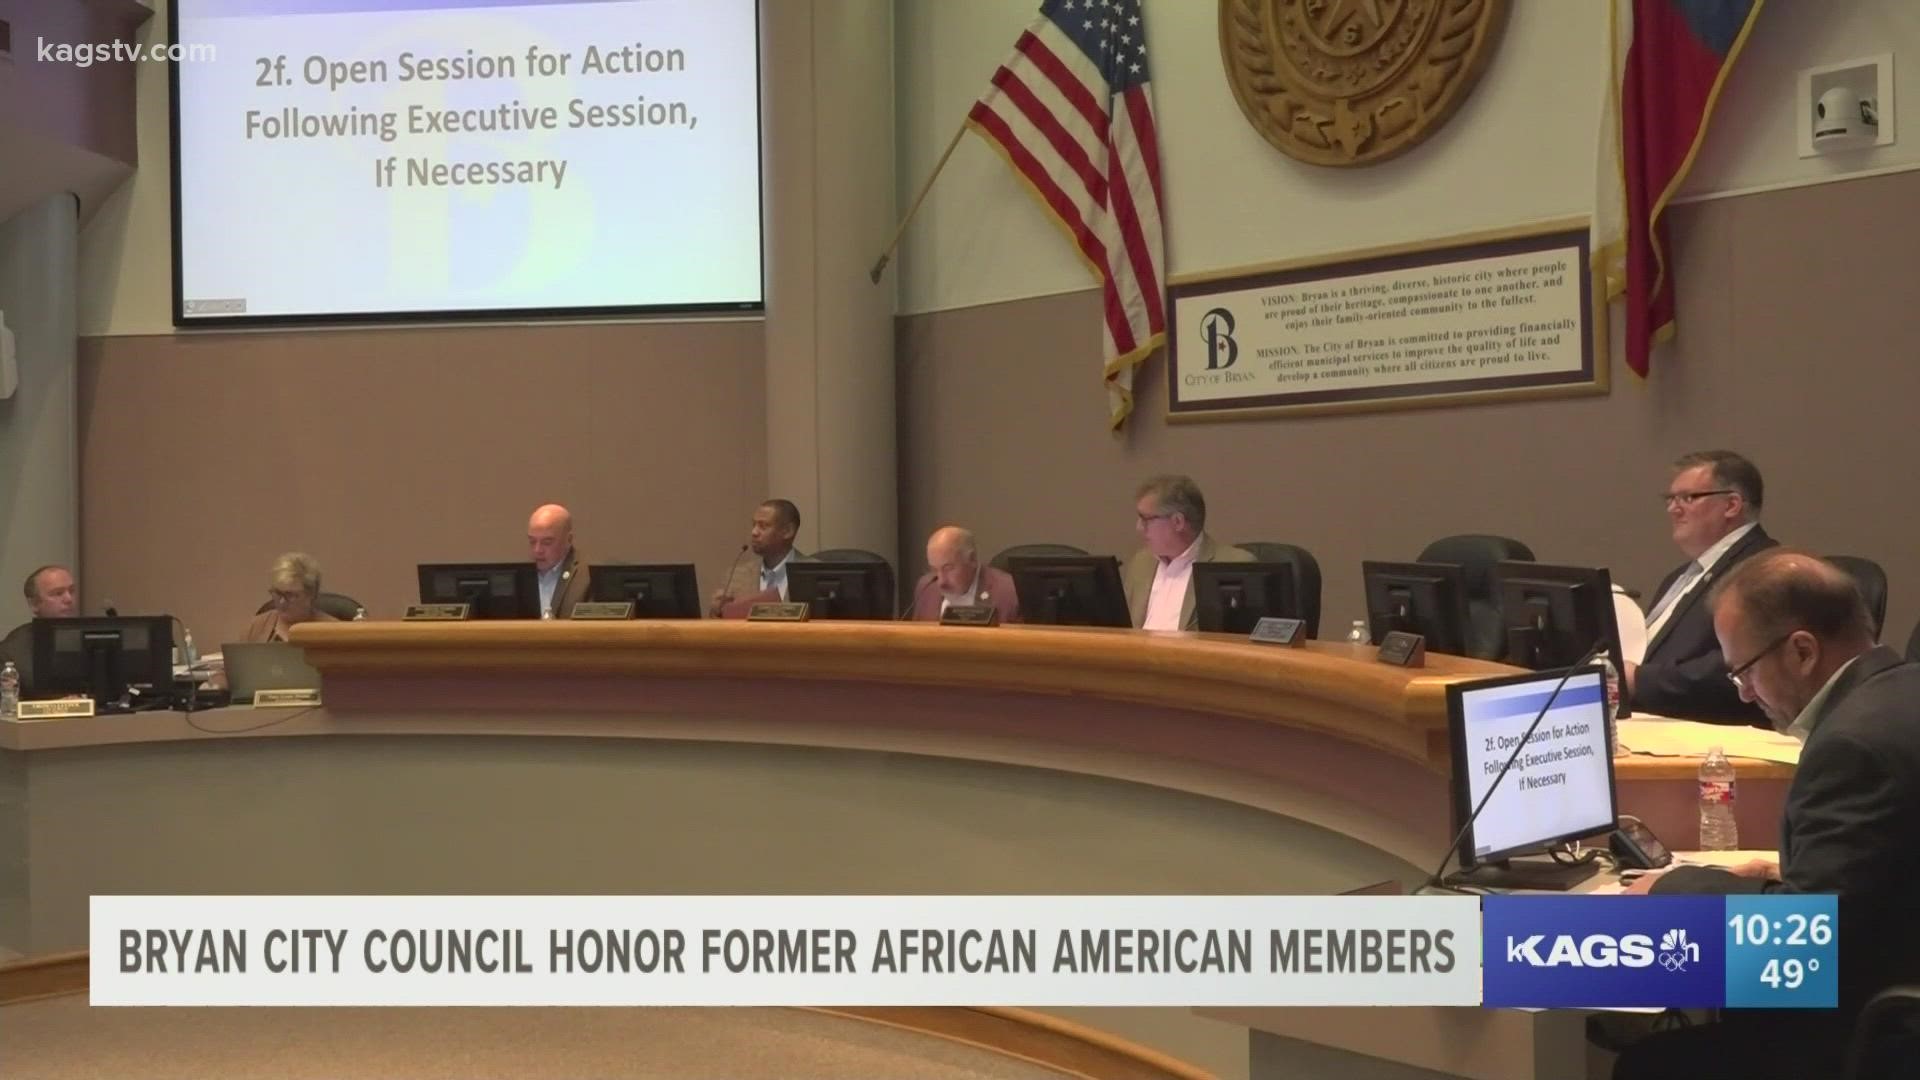 In honor of Black History Month, the Bryan City Council held a ceremony to recognize services and contributions of African Americans on the council past and present.